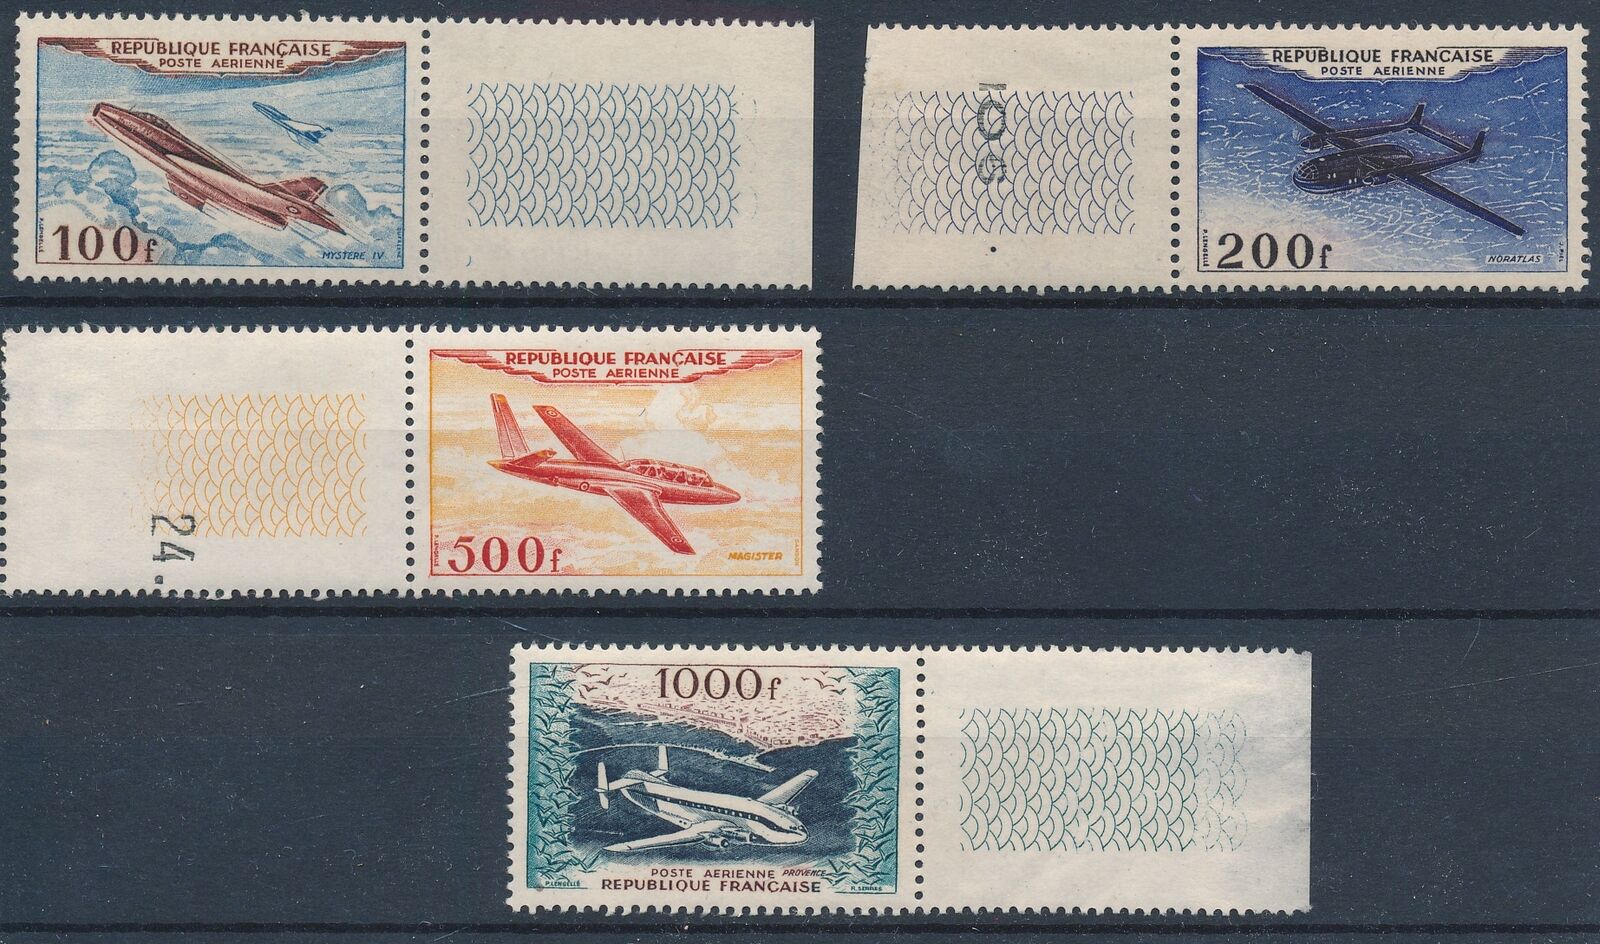 6789 France 1954 airmail good set very fine MNH stamps value 450